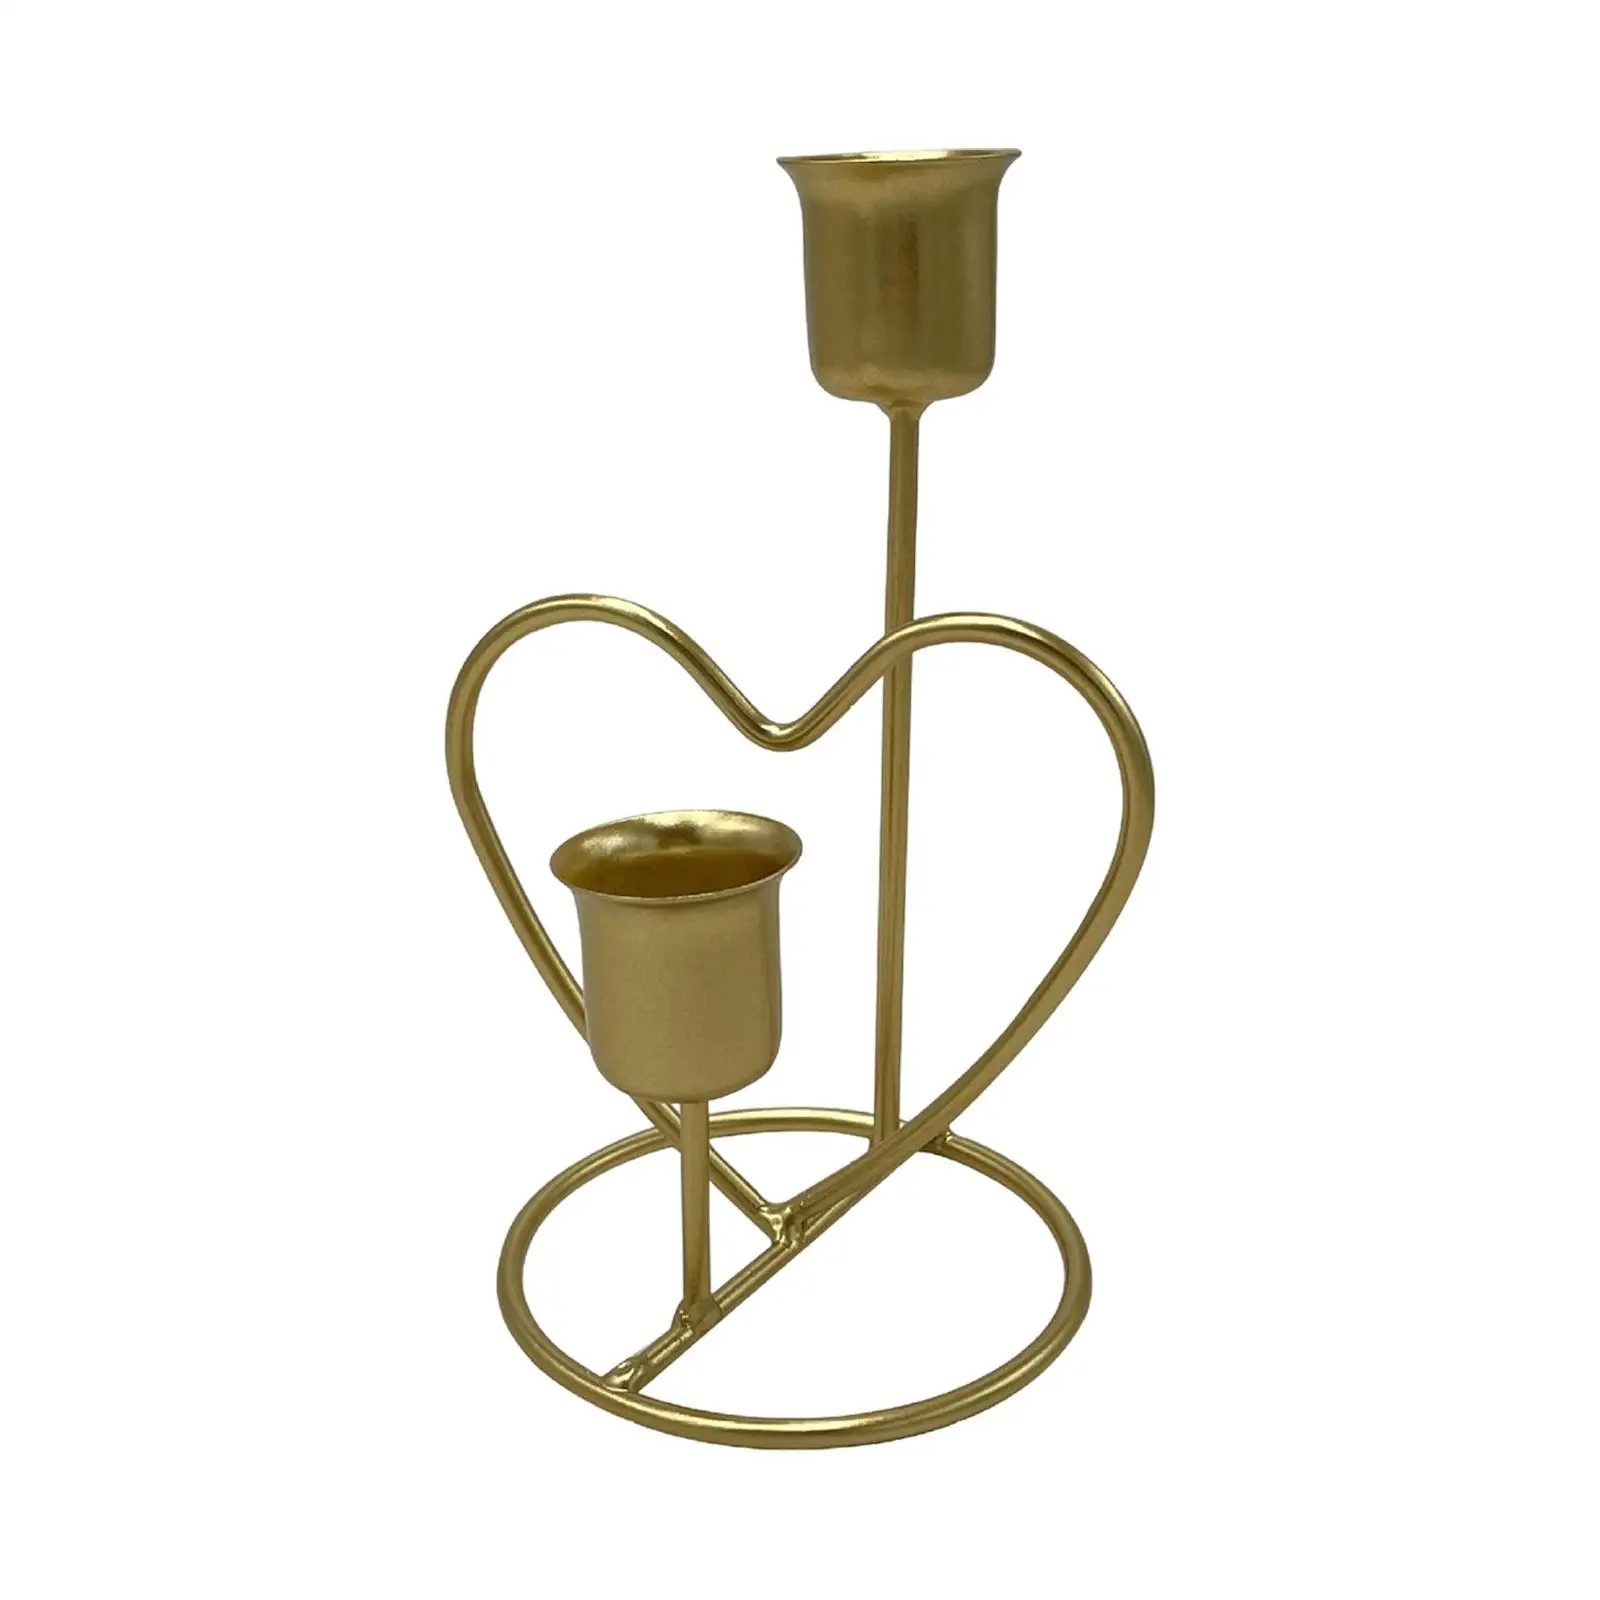 Heart Shaped Candle Candlestick Taper Candles Home Decor Portable Candles Lantern Tealight Candles Rustic Stand for Dining Table